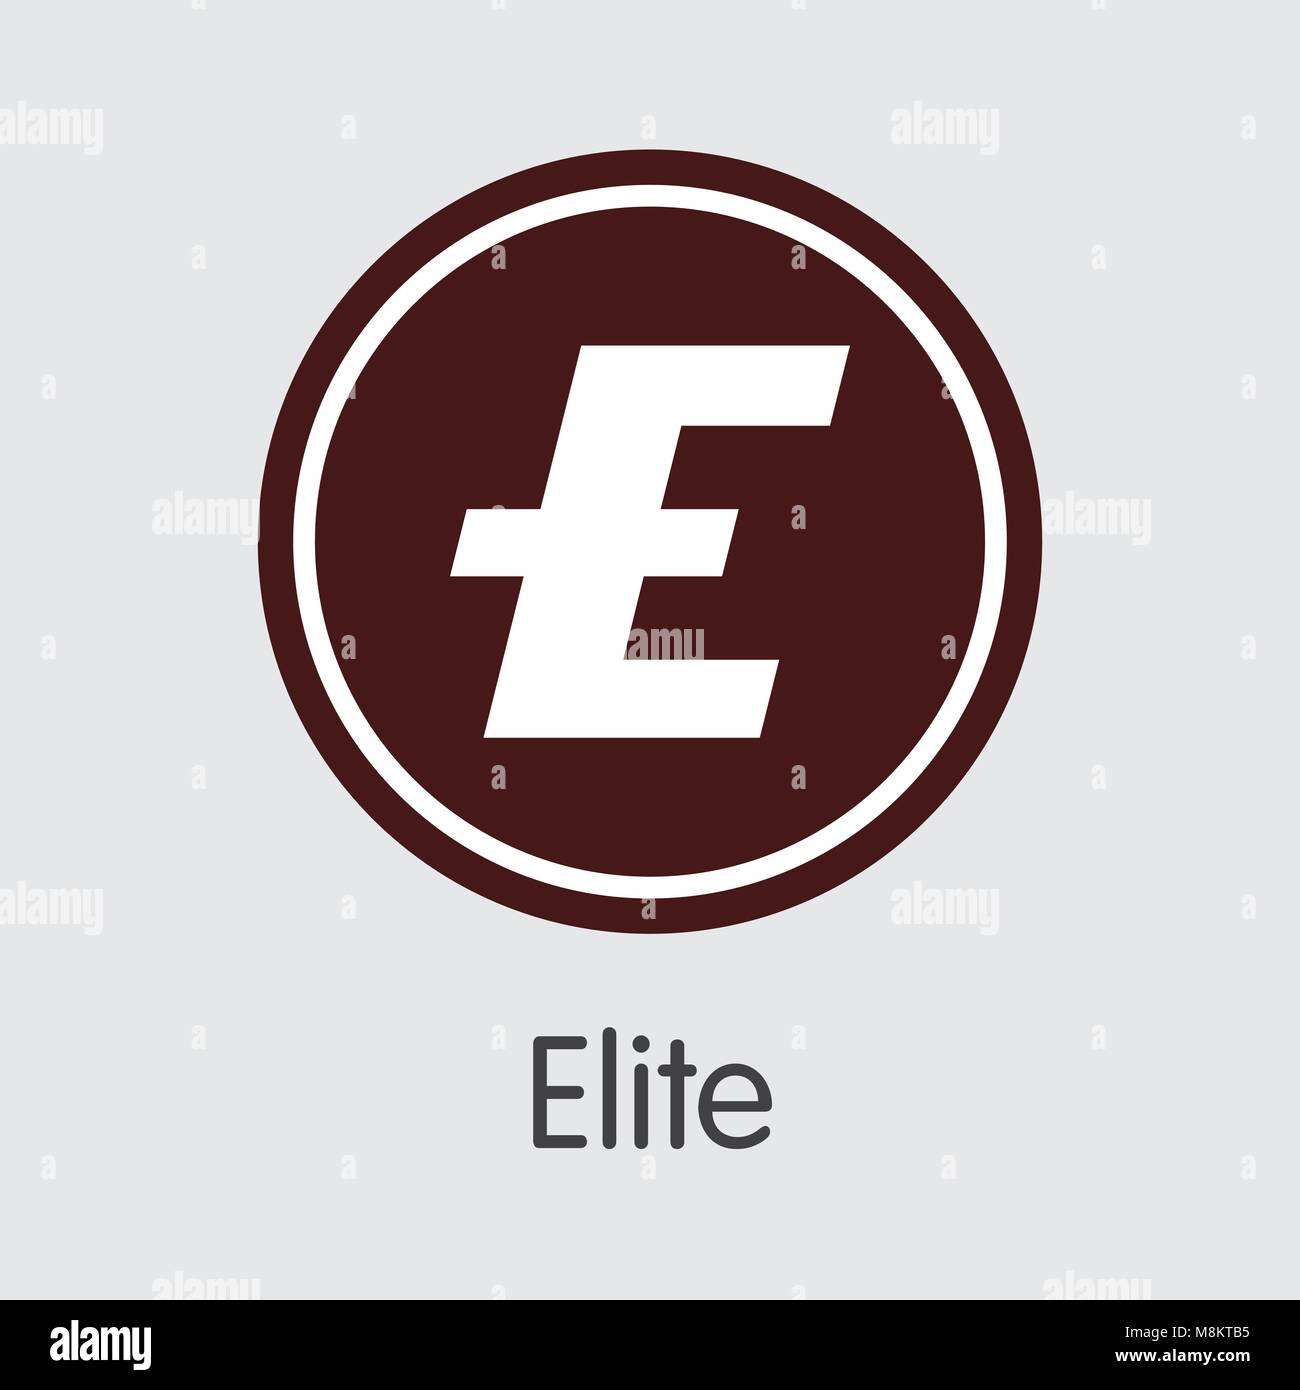 Elite - Crypto Currency Sign Icon. Stock Vector